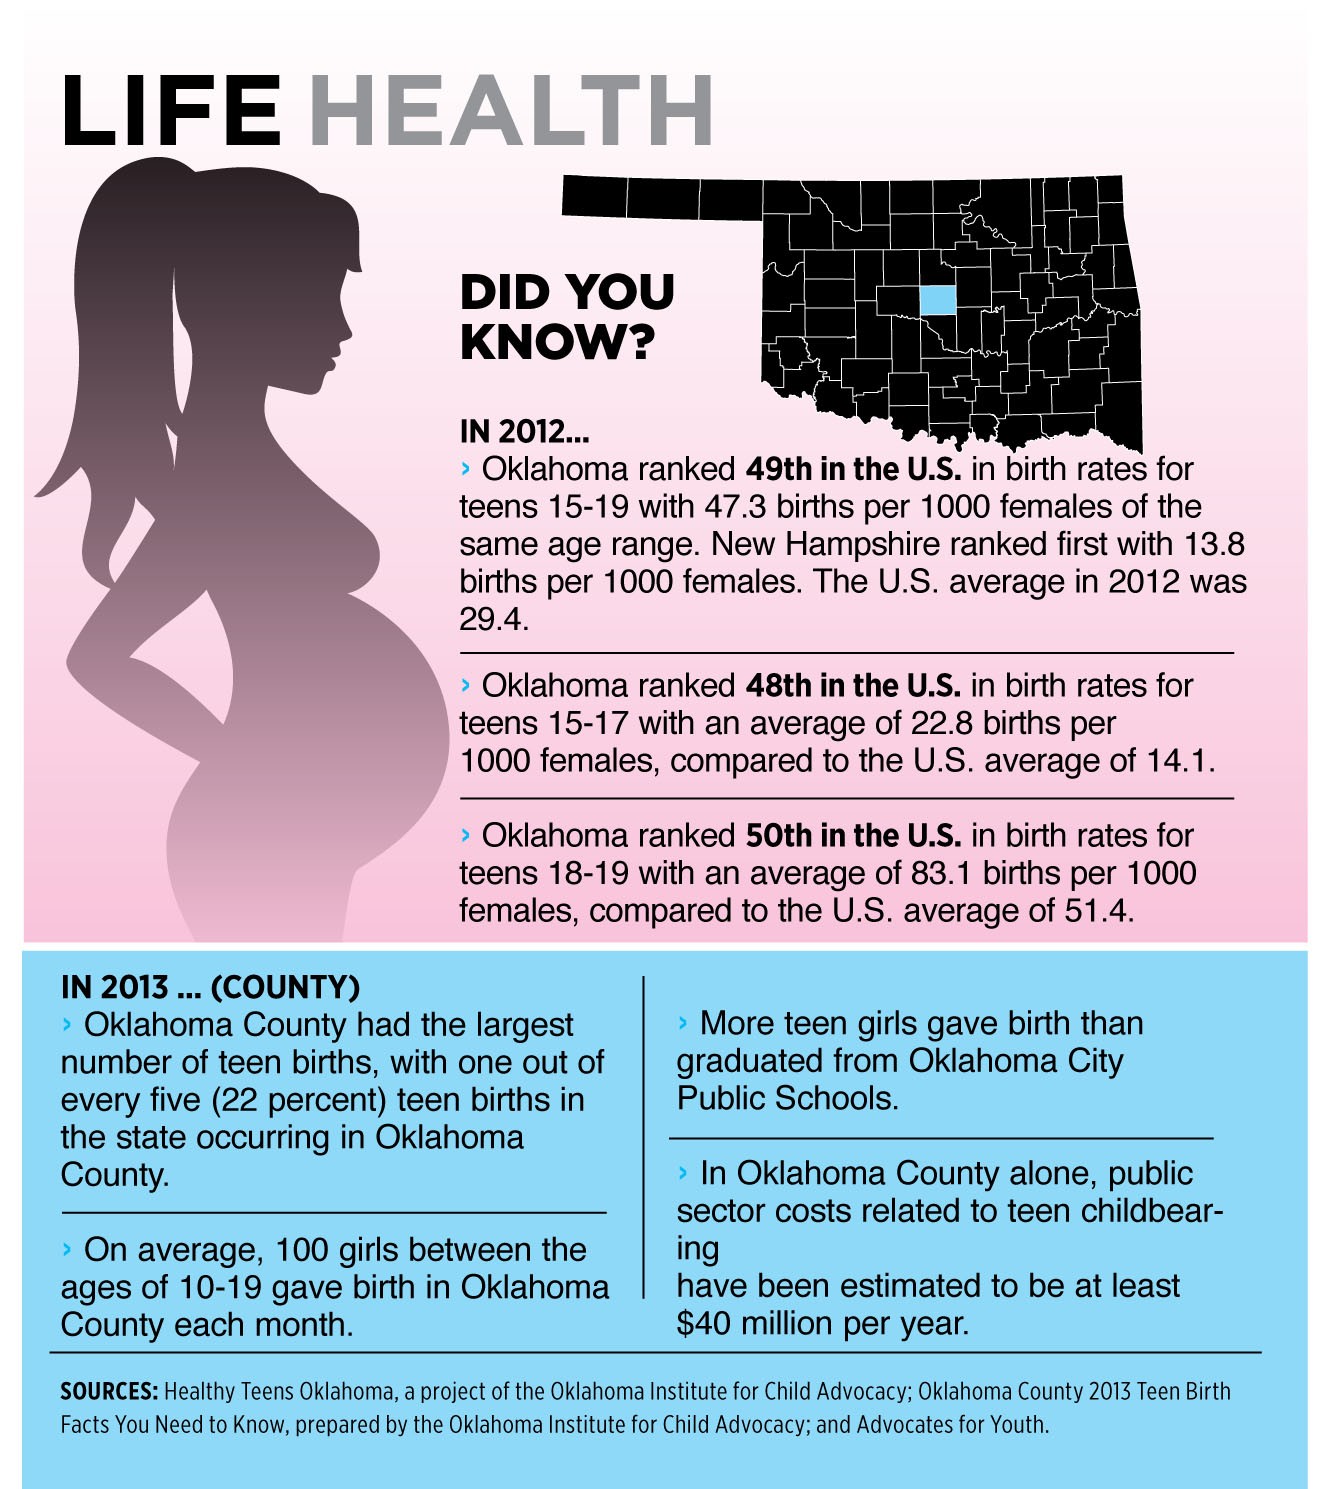 Prevention key to combating teen pregnancy